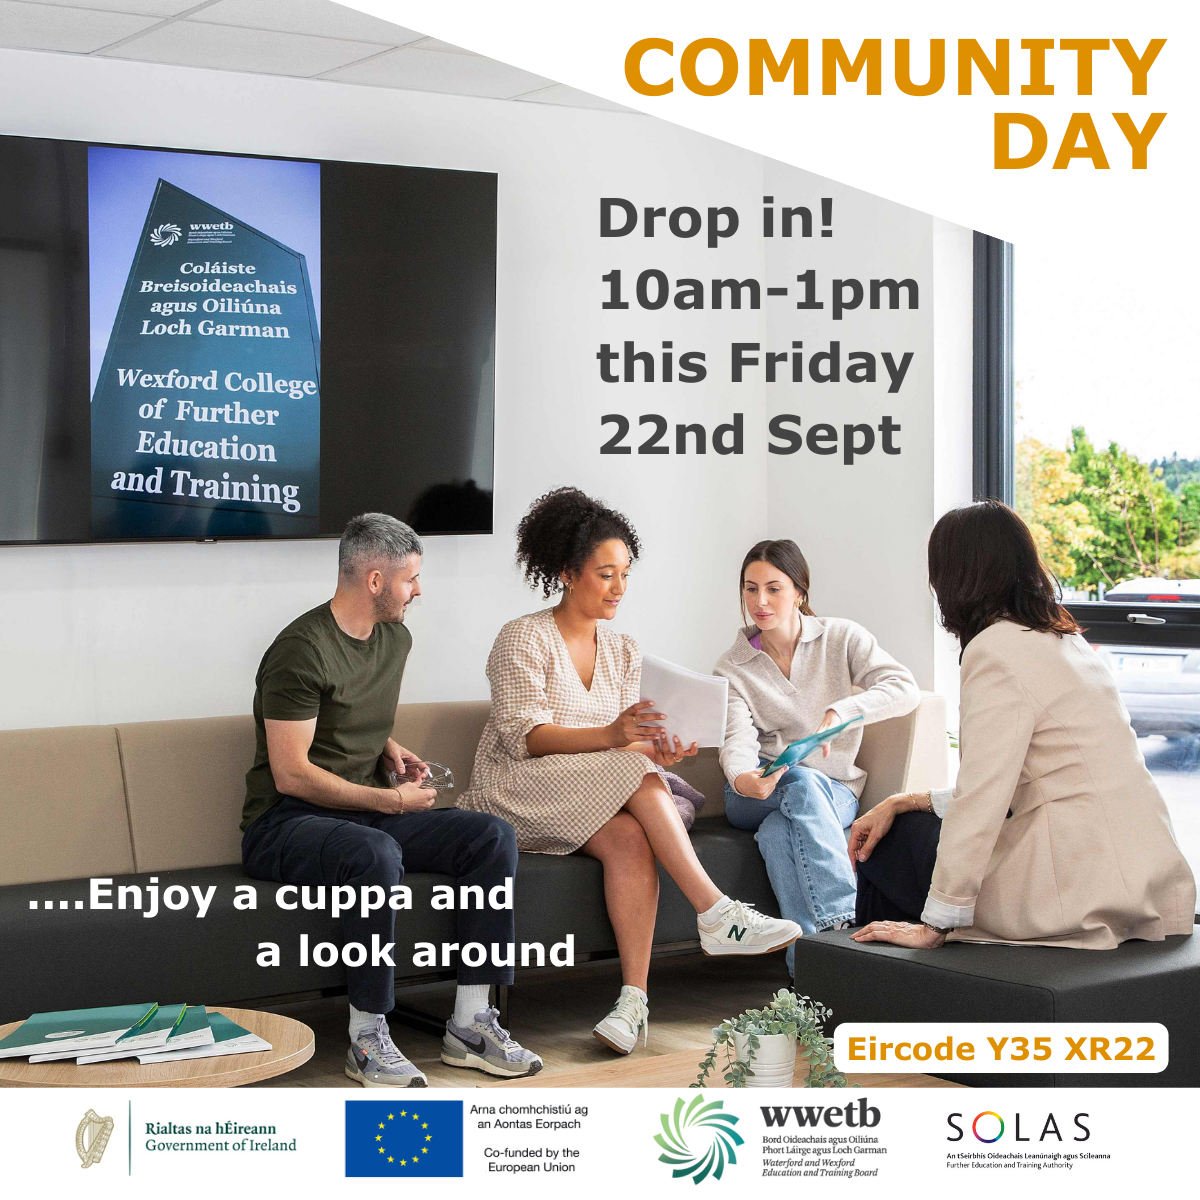 Community Day at our New Wexford College of Further Education and Training